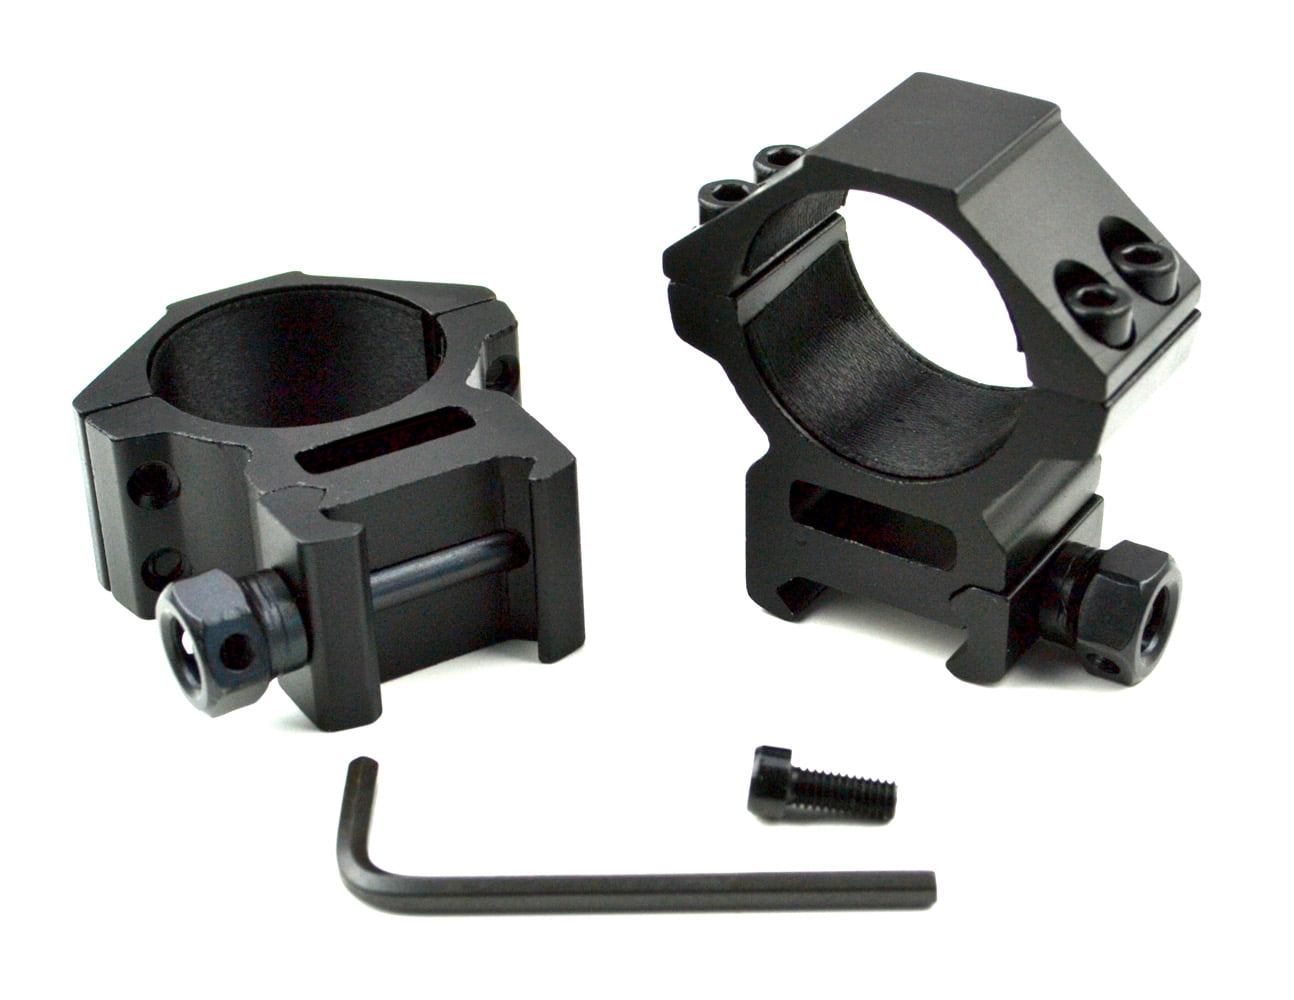 1 /2PCS See Through 20mm Rail High Profile Mount 30mm Ring For Rifle Scope 